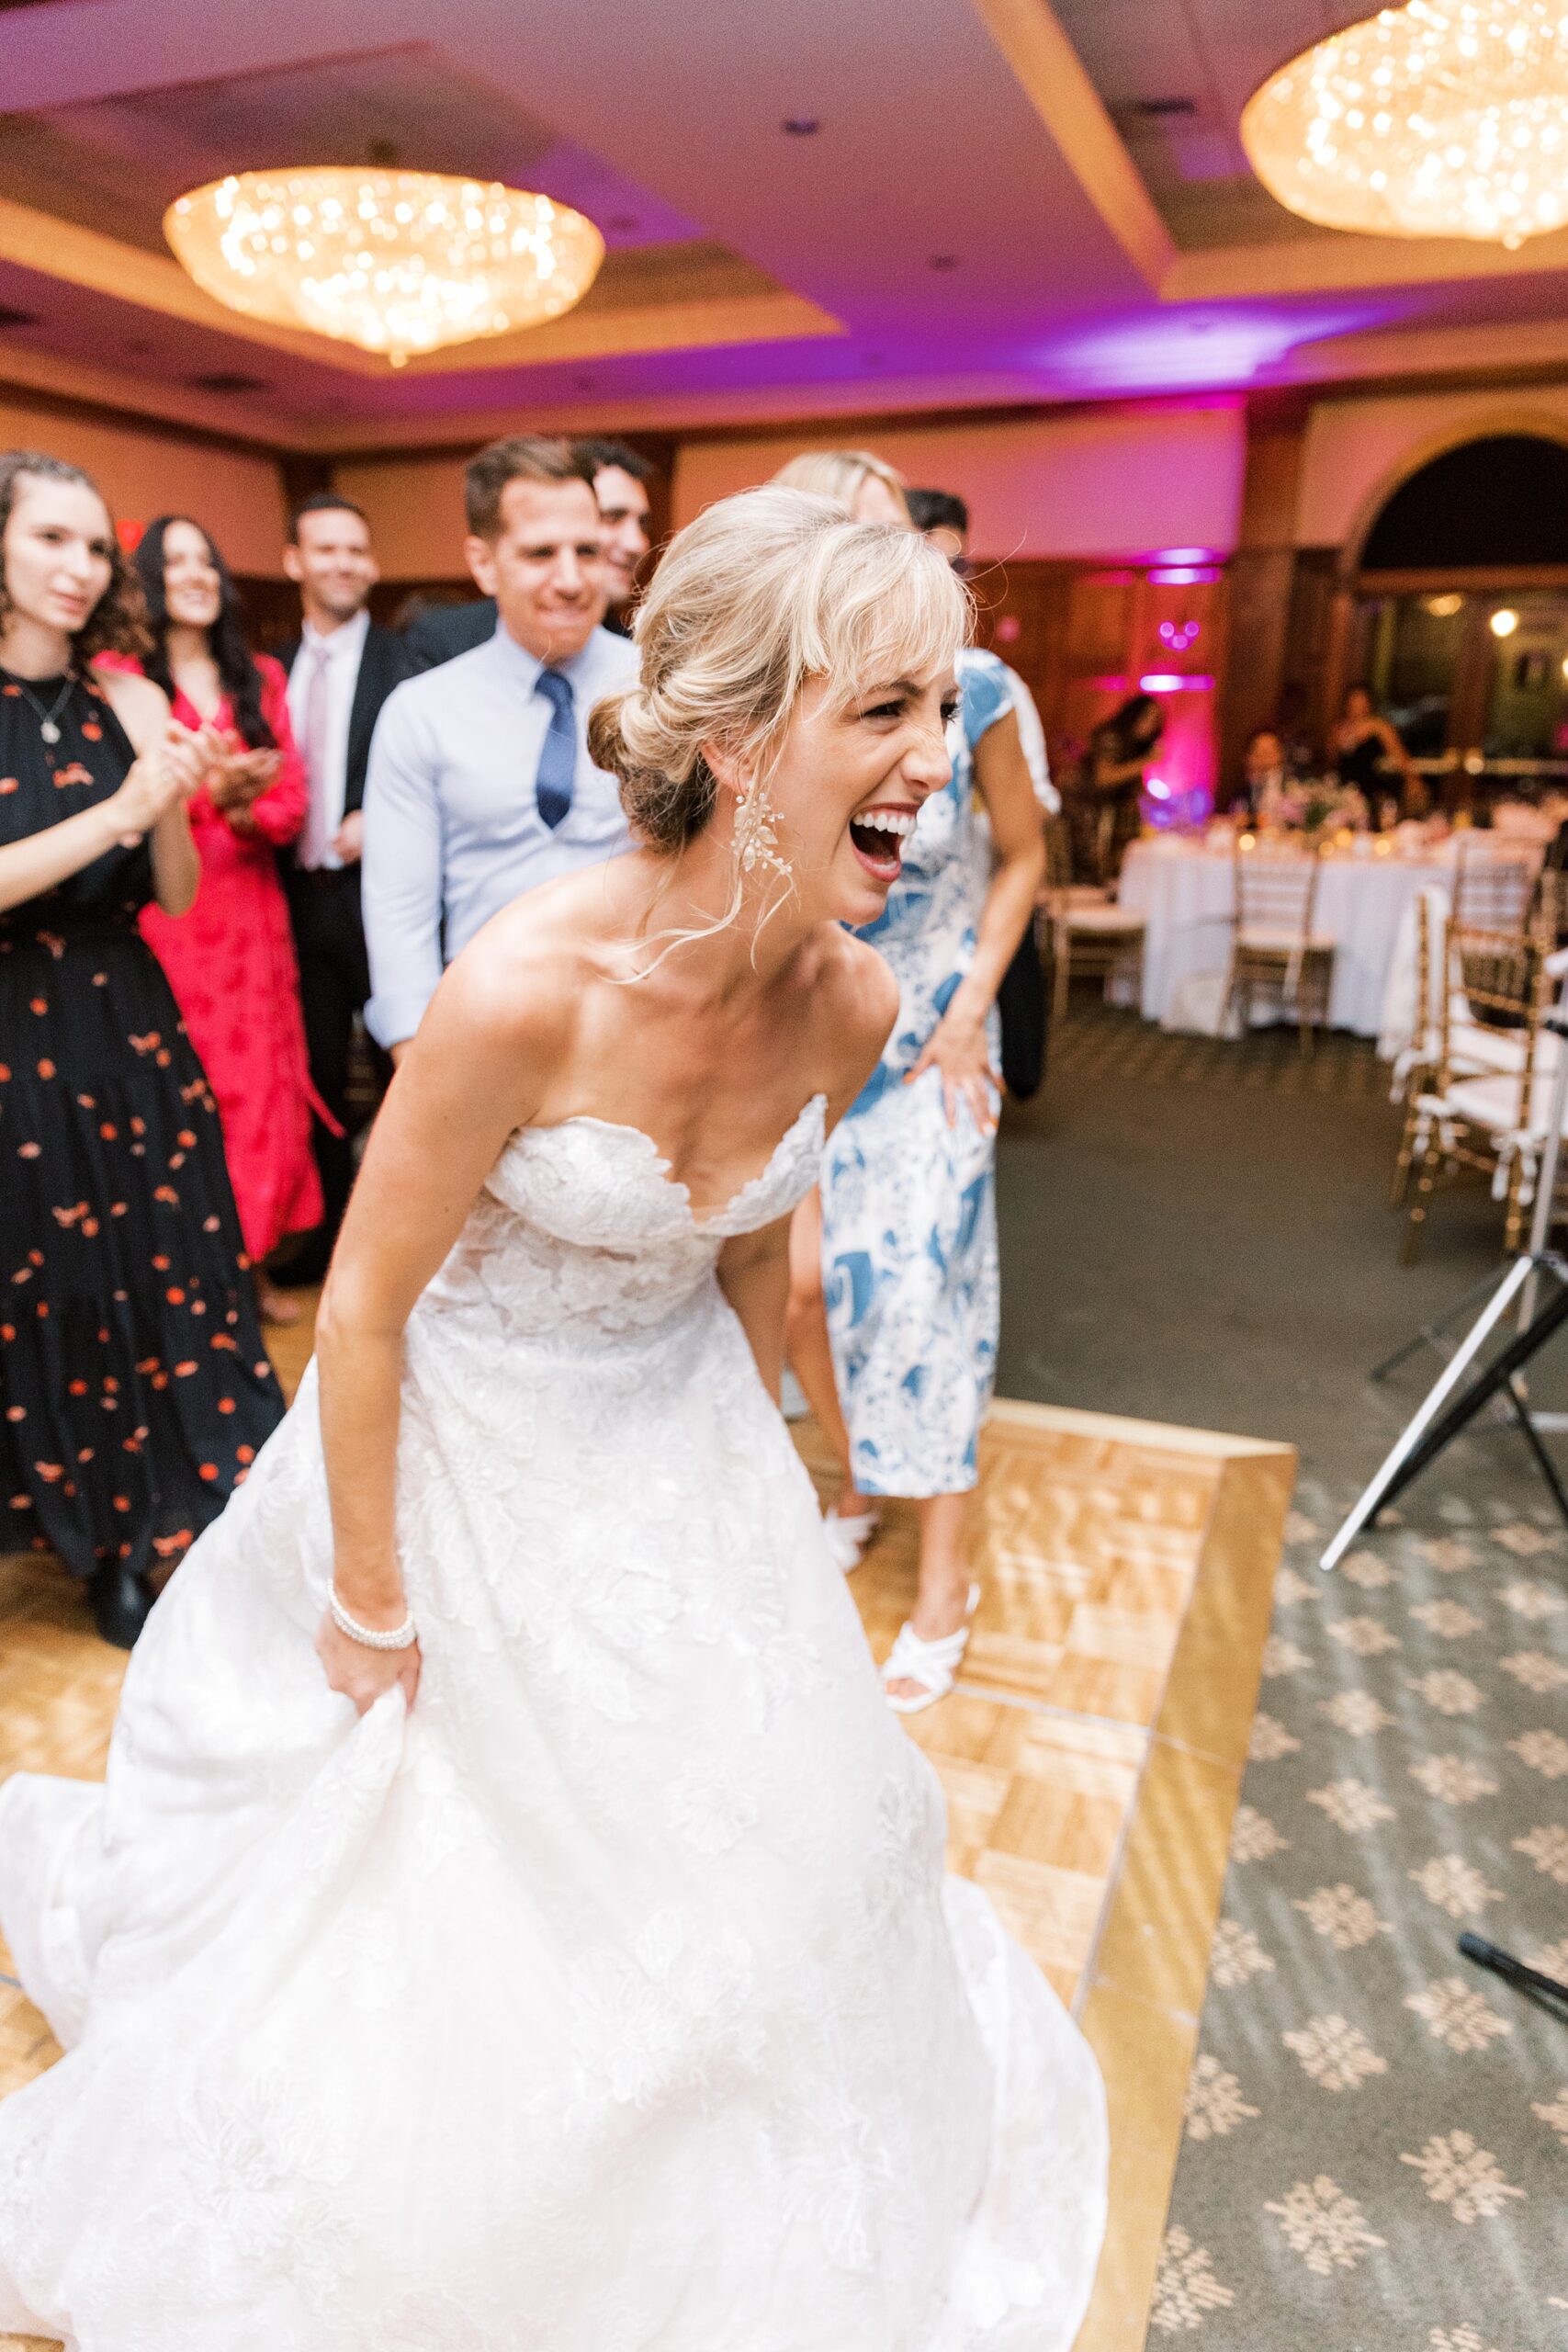 bride dances during wedding reception at Skytop Lodge with live band